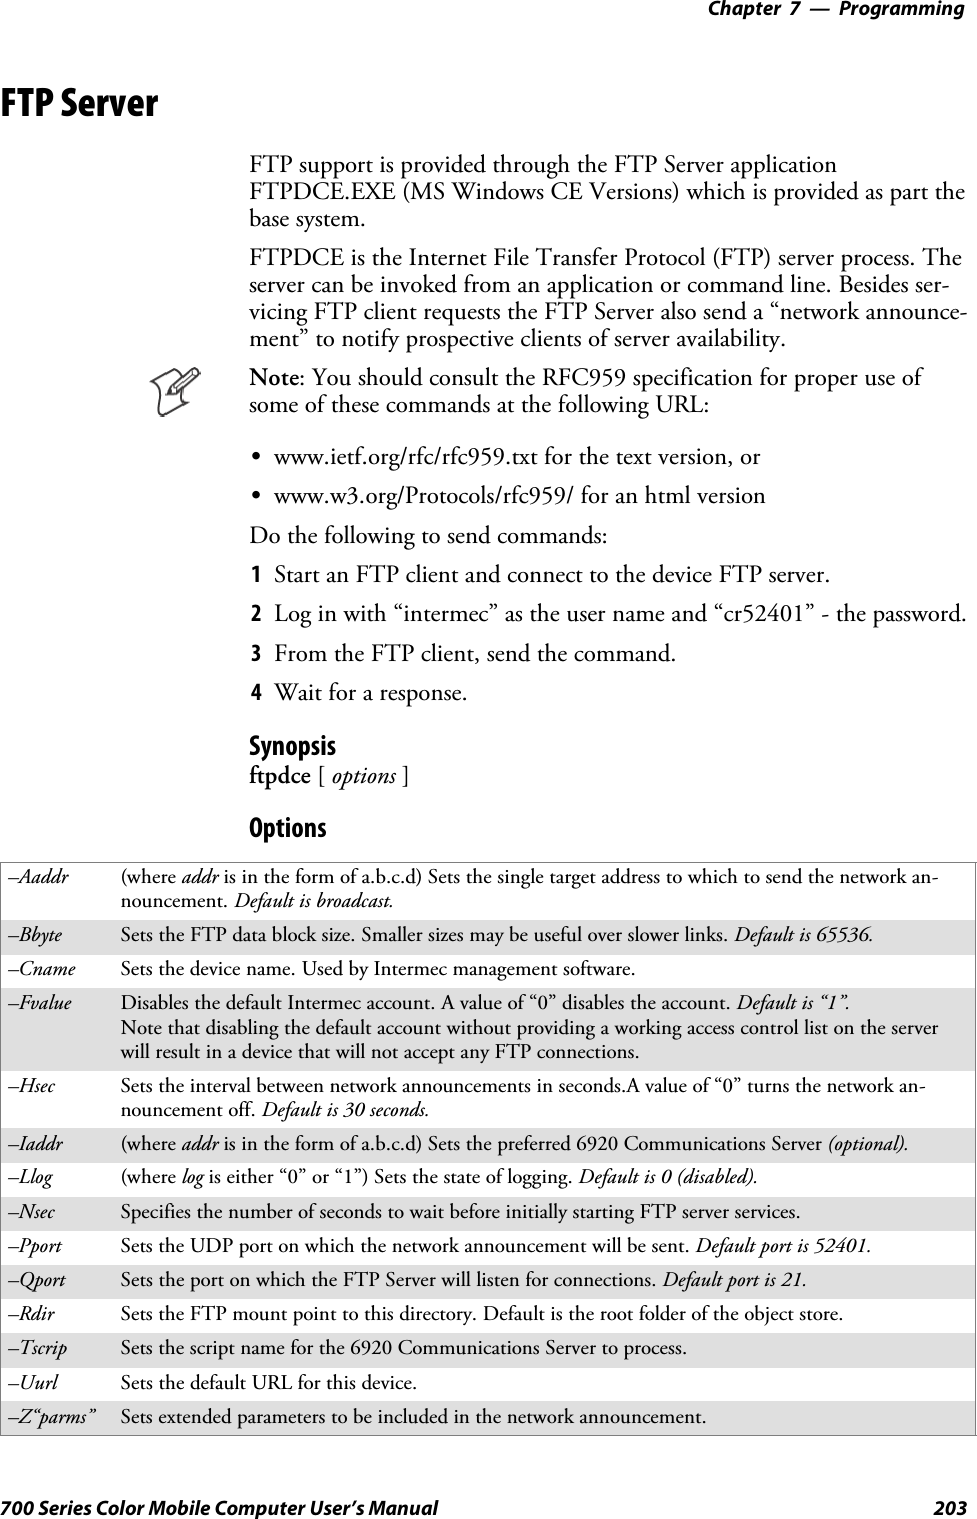 Programming—Chapter 7203700 Series Color Mobile Computer User’s ManualFTP ServerFTP support is provided through the FTP Server applicationFTPDCE.EXE (MS Windows CE Versions) which is provided as part thebase system.FTPDCE is the Internet File Transfer Protocol (FTP) server process. Theserver can be invoked from an application or command line. Besides ser-vicing FTP client requests the FTP Server also send a “network announce-ment” to notify prospective clients of server availability.Note: You should consult the RFC959 specification for proper use ofsome of these commands at the following URL:Swww.ietf.org/rfc/rfc959.txt for the text version, orSwww.w3.org/Protocols/rfc959/ for an html versionDo the following to send commands:1Start an FTP client and connect to the device FTP server.2Log in with “intermec” as the user name and “cr52401” - the password.3From the FTP client, send the command.4Wait for a response.Synopsisftpdce [options ]Options–Aaddr (where addr is in the form of a.b.c.d) Sets the single target address to which to send the network an-nouncement. Default is broadcast.–Bbyte Sets the FTP data block size. Smaller sizes may be useful over slower links. Default is 65536.–Cname Sets the device name. Used by Intermec management software.–Fvalue Disables the default Intermec account. A value of “0” disables the account. Default is “1”.Note that disabling the default account without providing a working access control list on the serverwill result in a device that will not accept any FTP connections.–Hsec Sets the interval between network announcements in seconds.A value of “0” turns the network an-nouncement off. Default is 30 seconds.–Iaddr (where addr is in the form of a.b.c.d) Sets the preferred 6920 Communications Server (optional).–Llog (where log is either “0” or “1”) Sets the state of logging. Default is 0 (disabled).–Nsec Specifies the number of seconds to wait before initially starting FTP server services.–Pport Sets the UDP port on which the network announcement will be sent. Default port is 52401.–Qport Sets the port on which the FTP Server will listen for connections. Defaultportis21.–Rdir Sets the FTP mount point to this directory. Default is the root folder of the object store.–Tscrip Sets the script name for the 6920 Communications Server to process.–Uurl Sets the default URL for this device.–Z“parms” Sets extended parameters to be included in the network announcement.